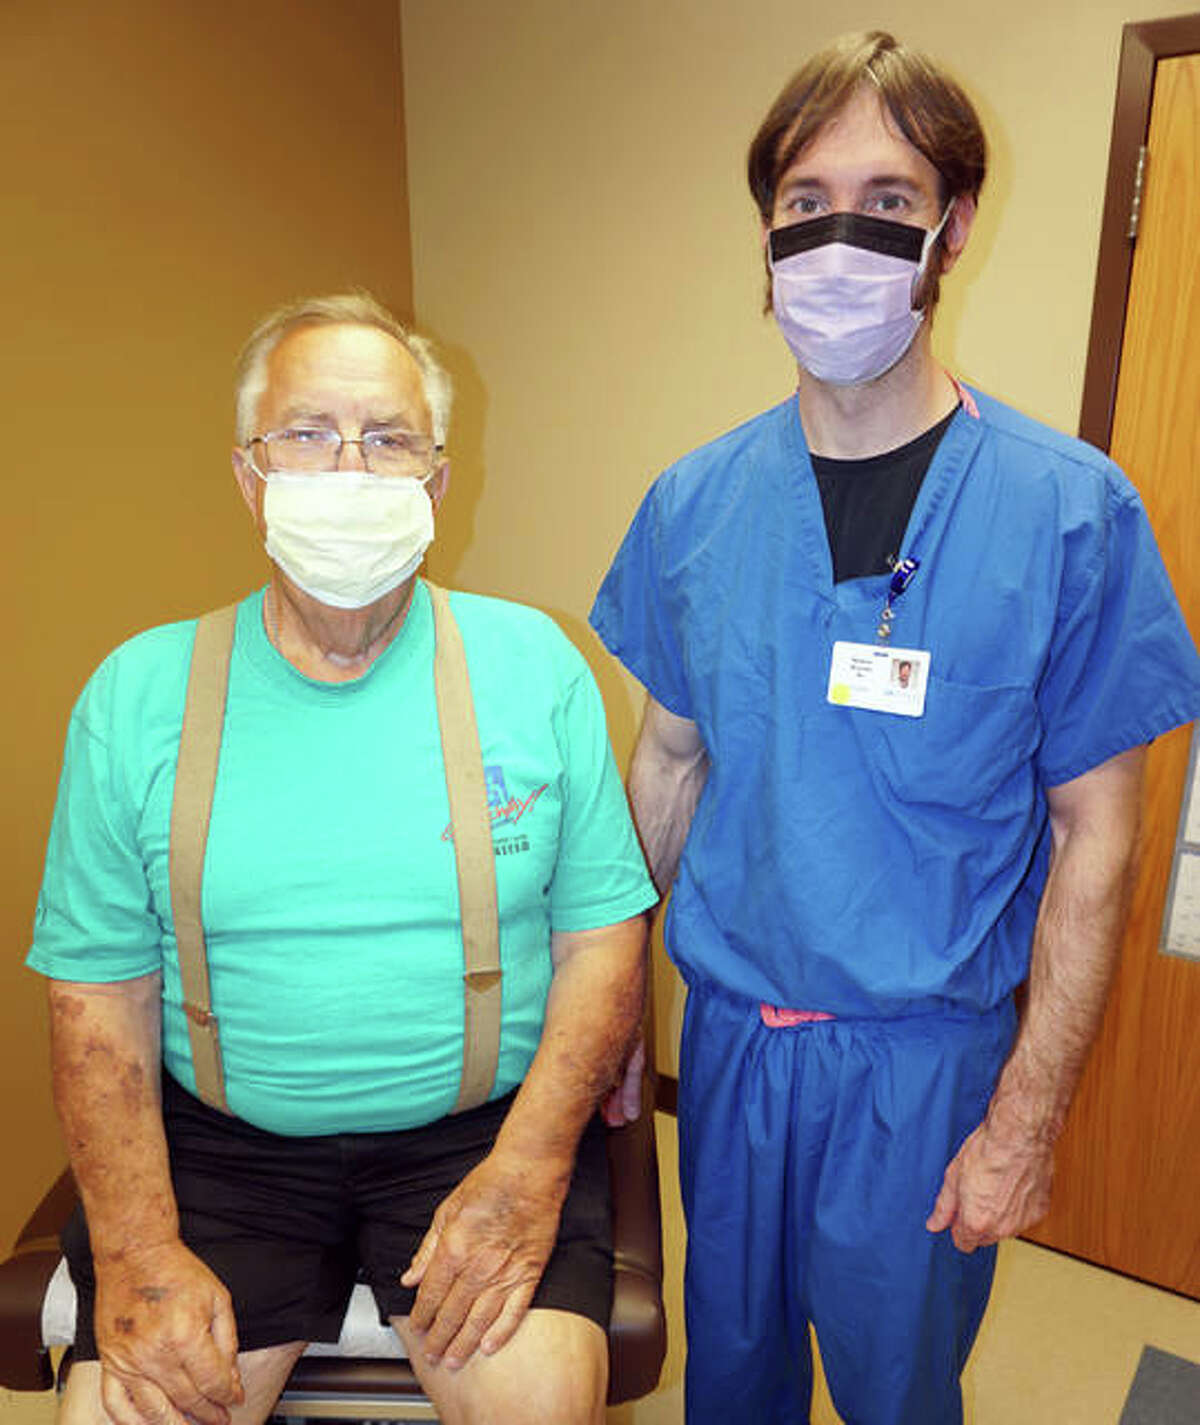 Paul Waters of Bunker Hill is shown with Dr. Matthew Musielak, the surgeon at Alton Memorial Hospital who leads the Bariatrics program. Through the program, Waters has lost 59 pounds.